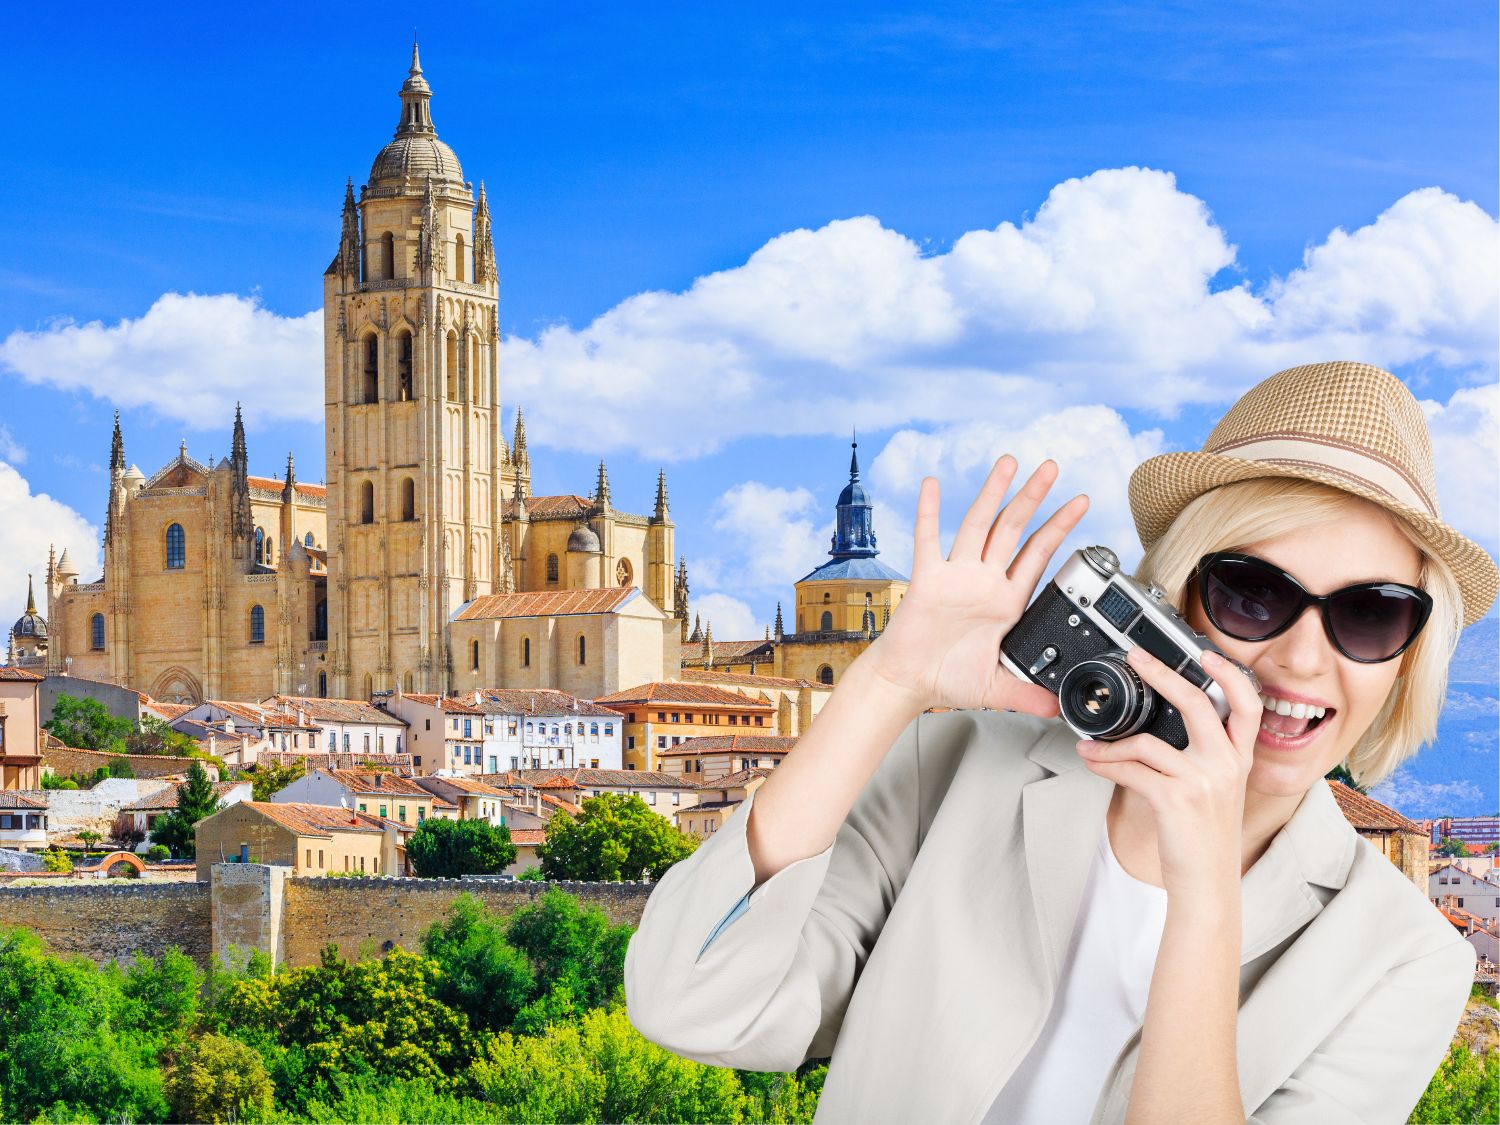 The 6 Best Spain Tours For Unforgettable Adventures That Are Achievable & Affordable